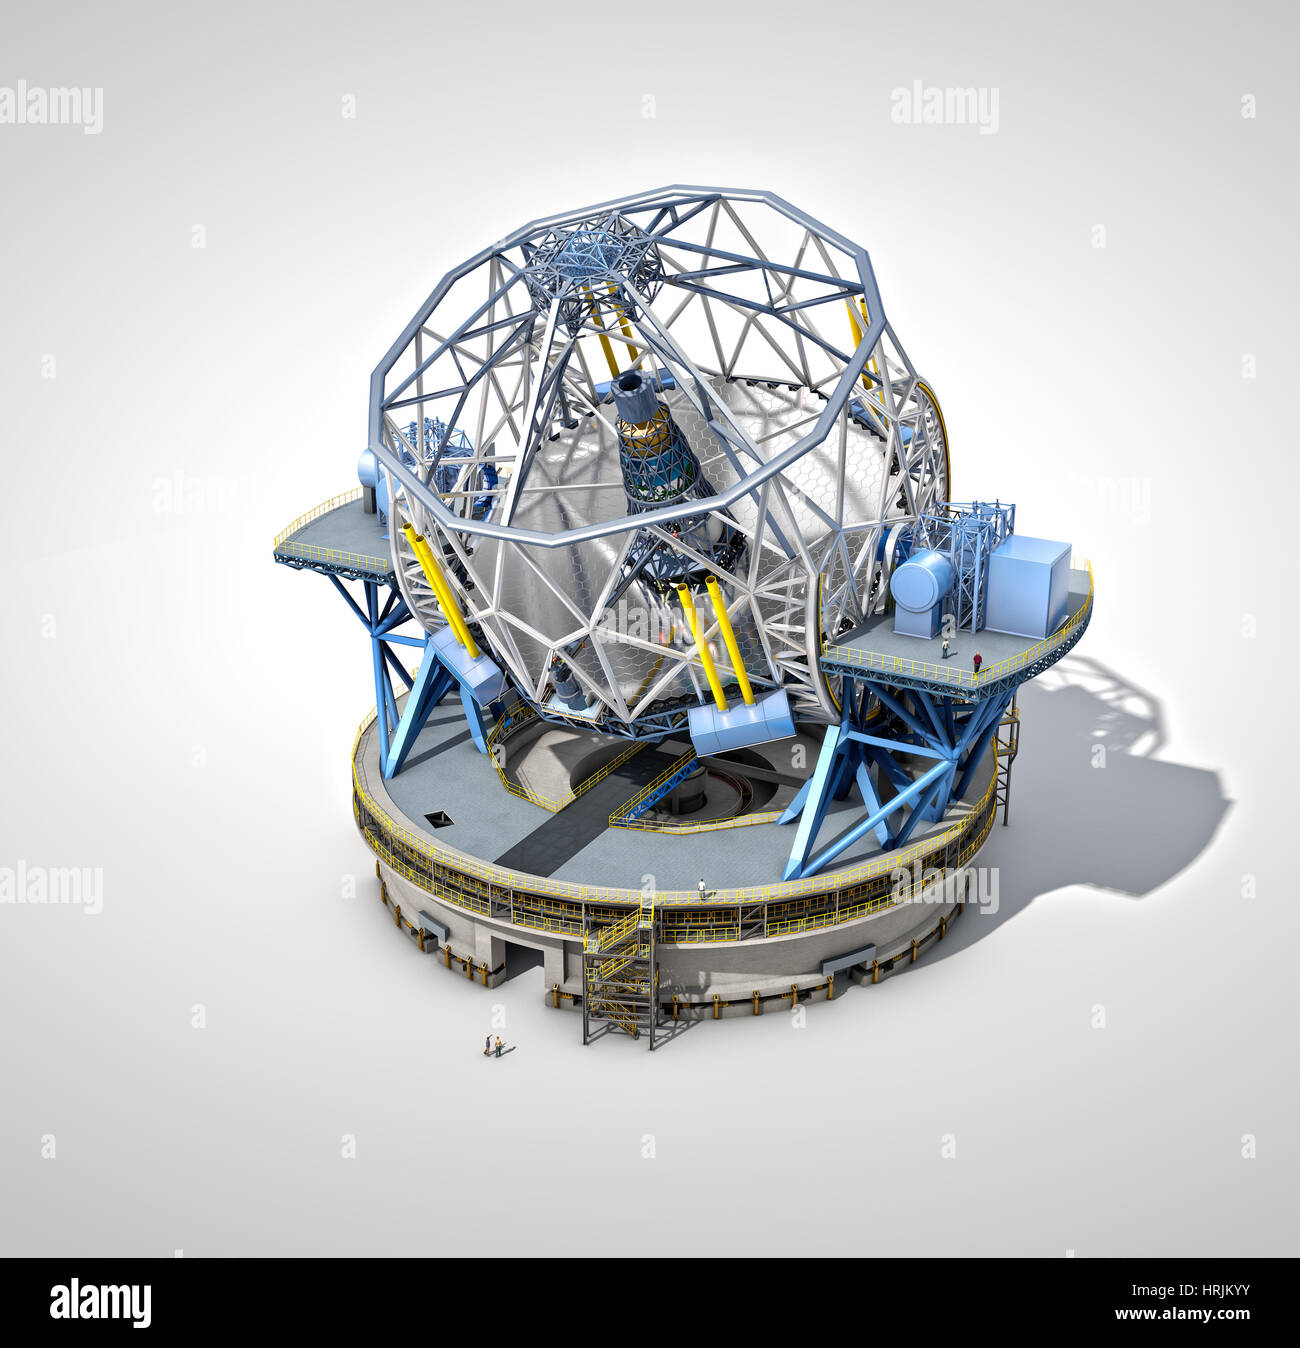 European Extremely Large Telescope Banque D'Images